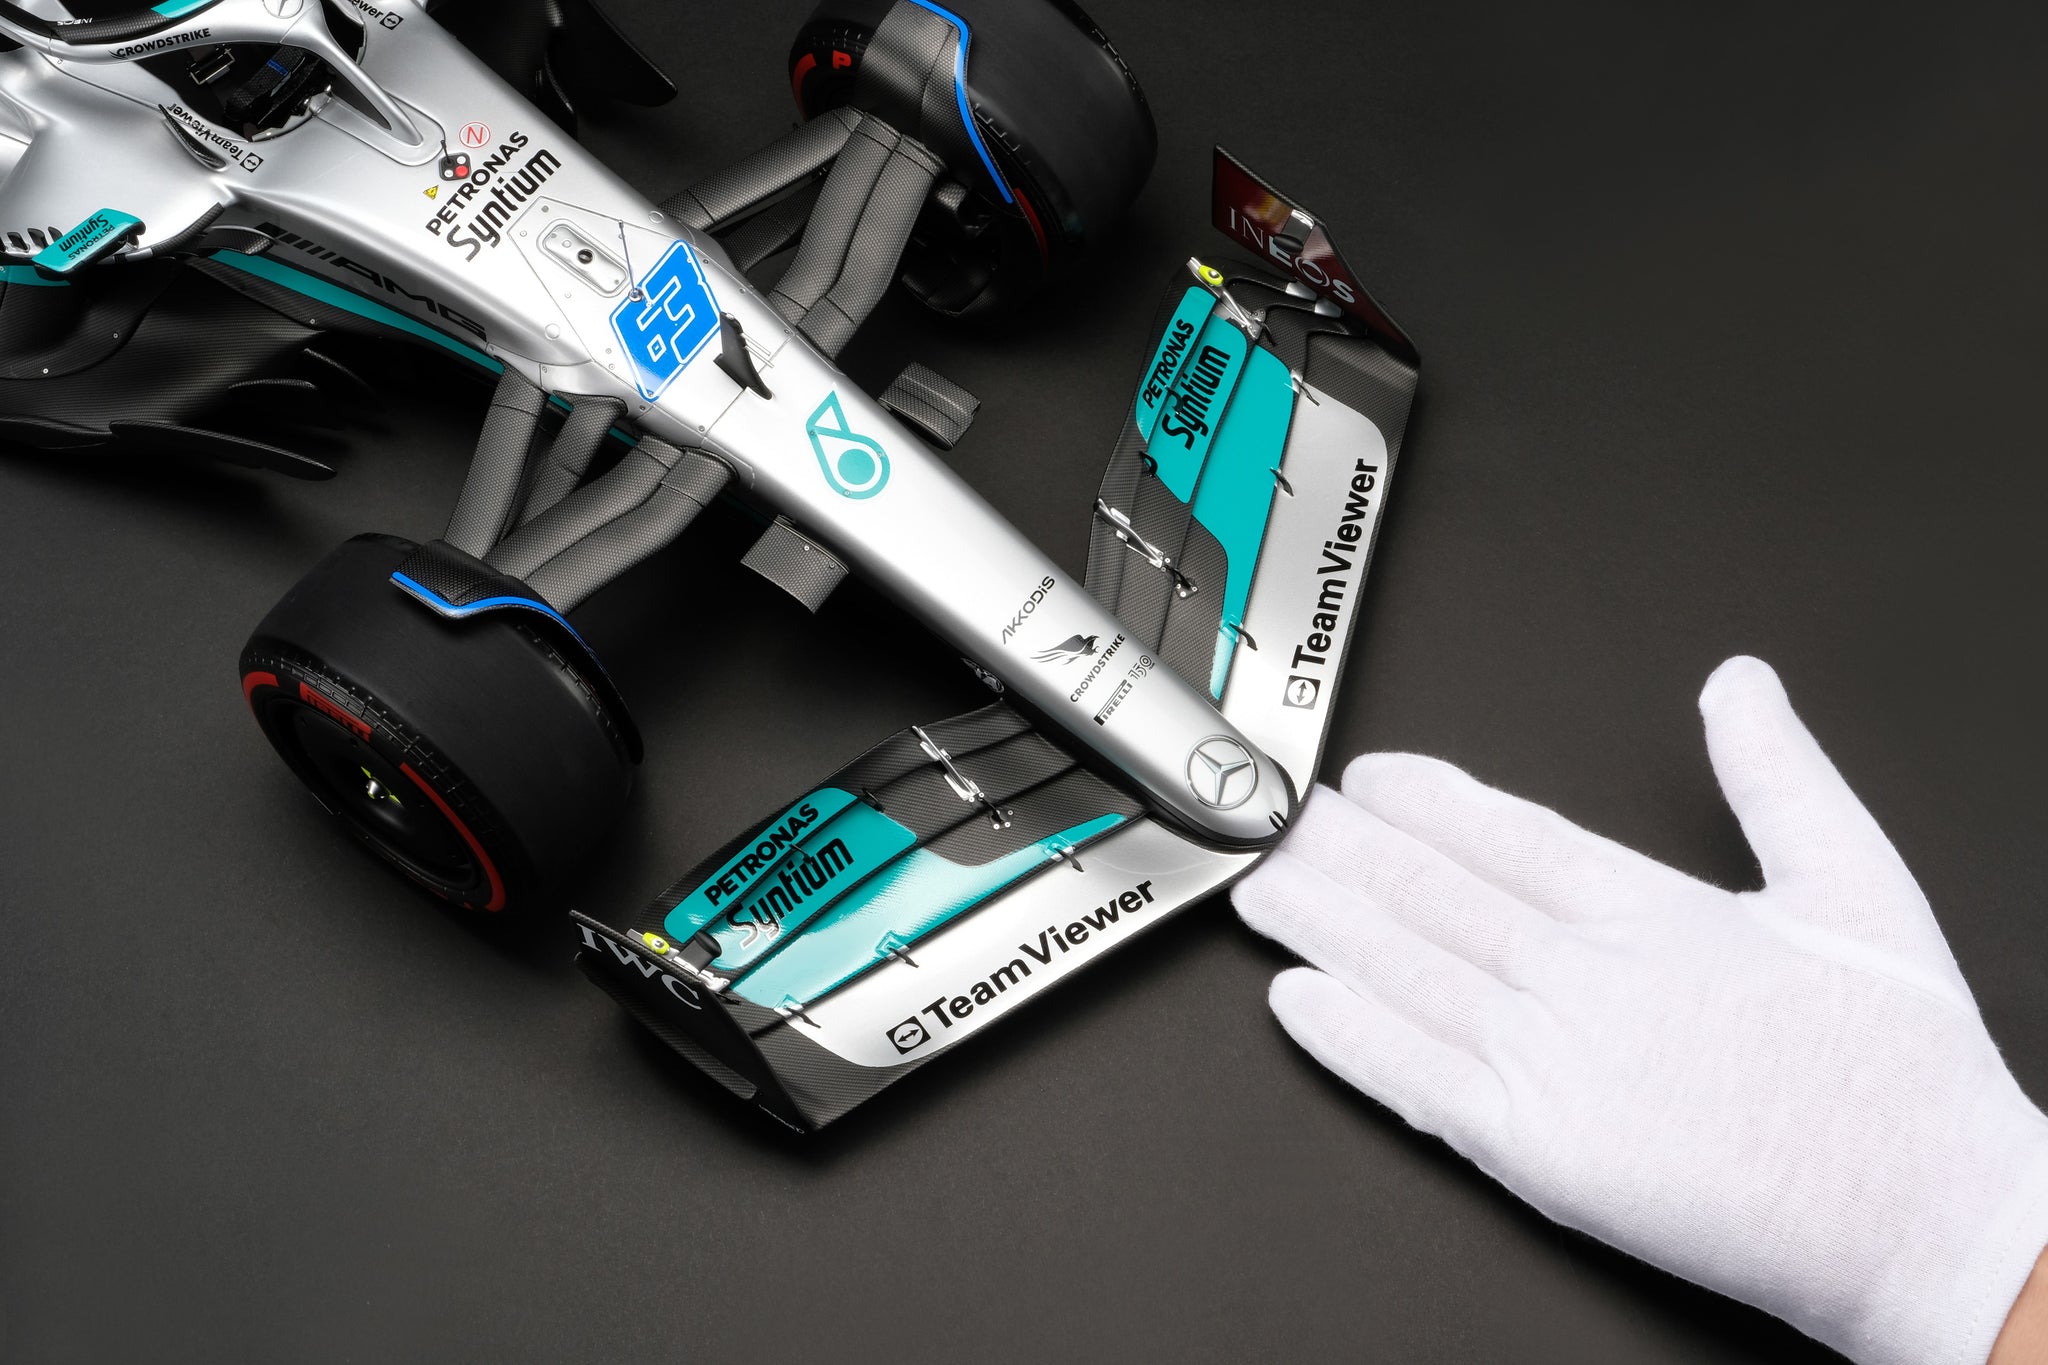 Mercedes-AMG F1 W13 E Performance at 1:8 scale model by Amalgam Collection